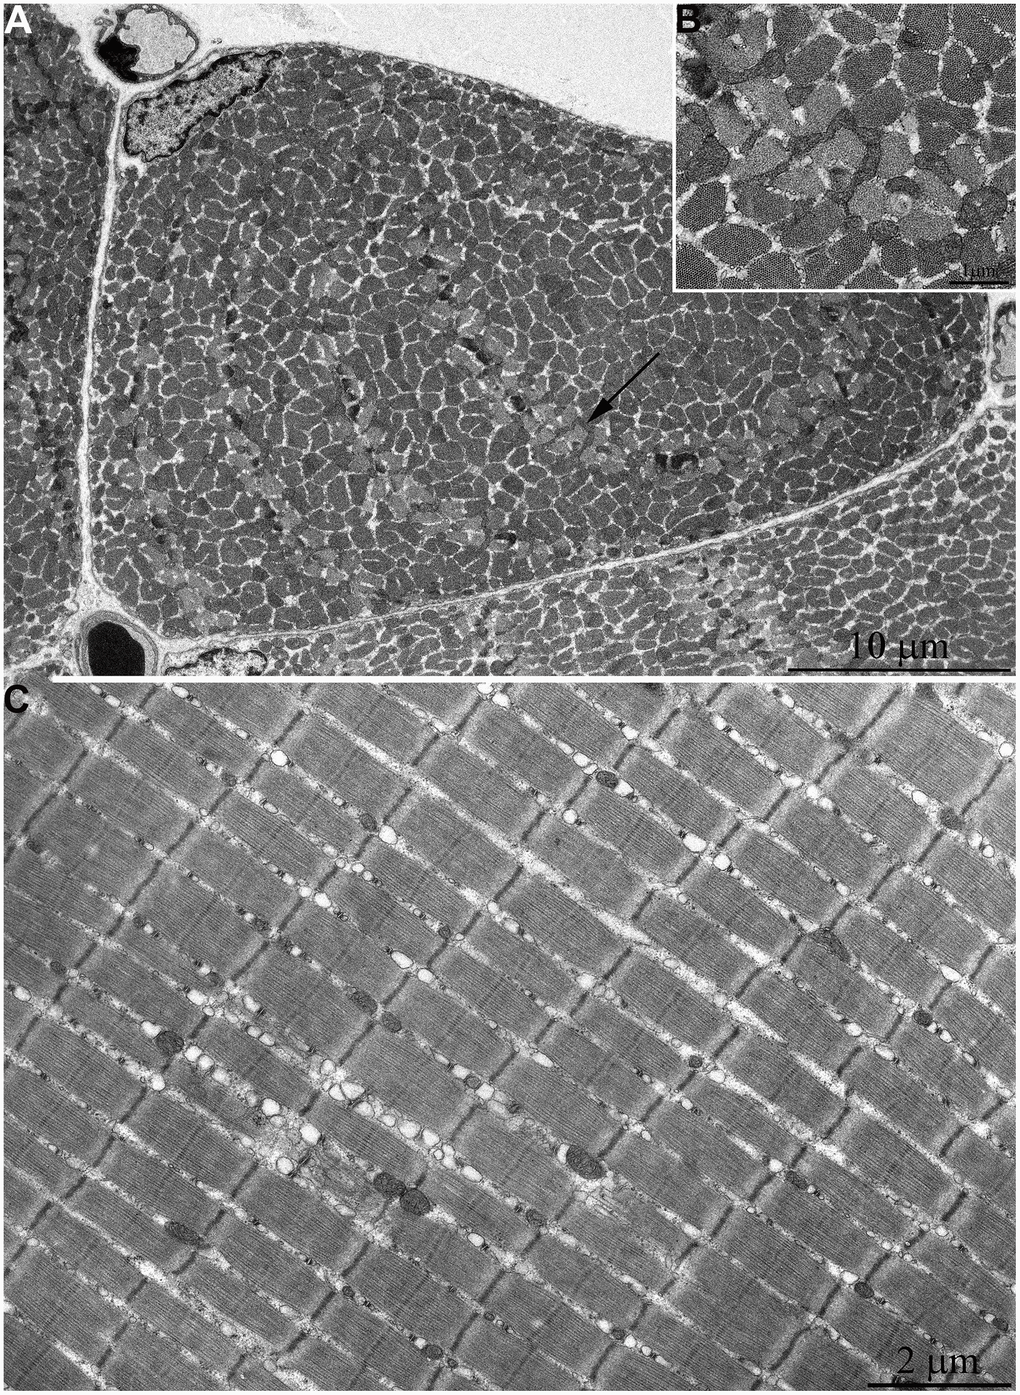 Ultrastructure of mitochondria in skeletal muscle of six-month-old naked mole rat. (A) Cross section of muscle fiber. Small, isolated mitochondria and group of mitochondria, which ultrastructure is demonstrated at higher magnification in (B) is indicated by an arrow. (C) Longitudinal section of muscle fiber. Small, widely spaced mitochondria.